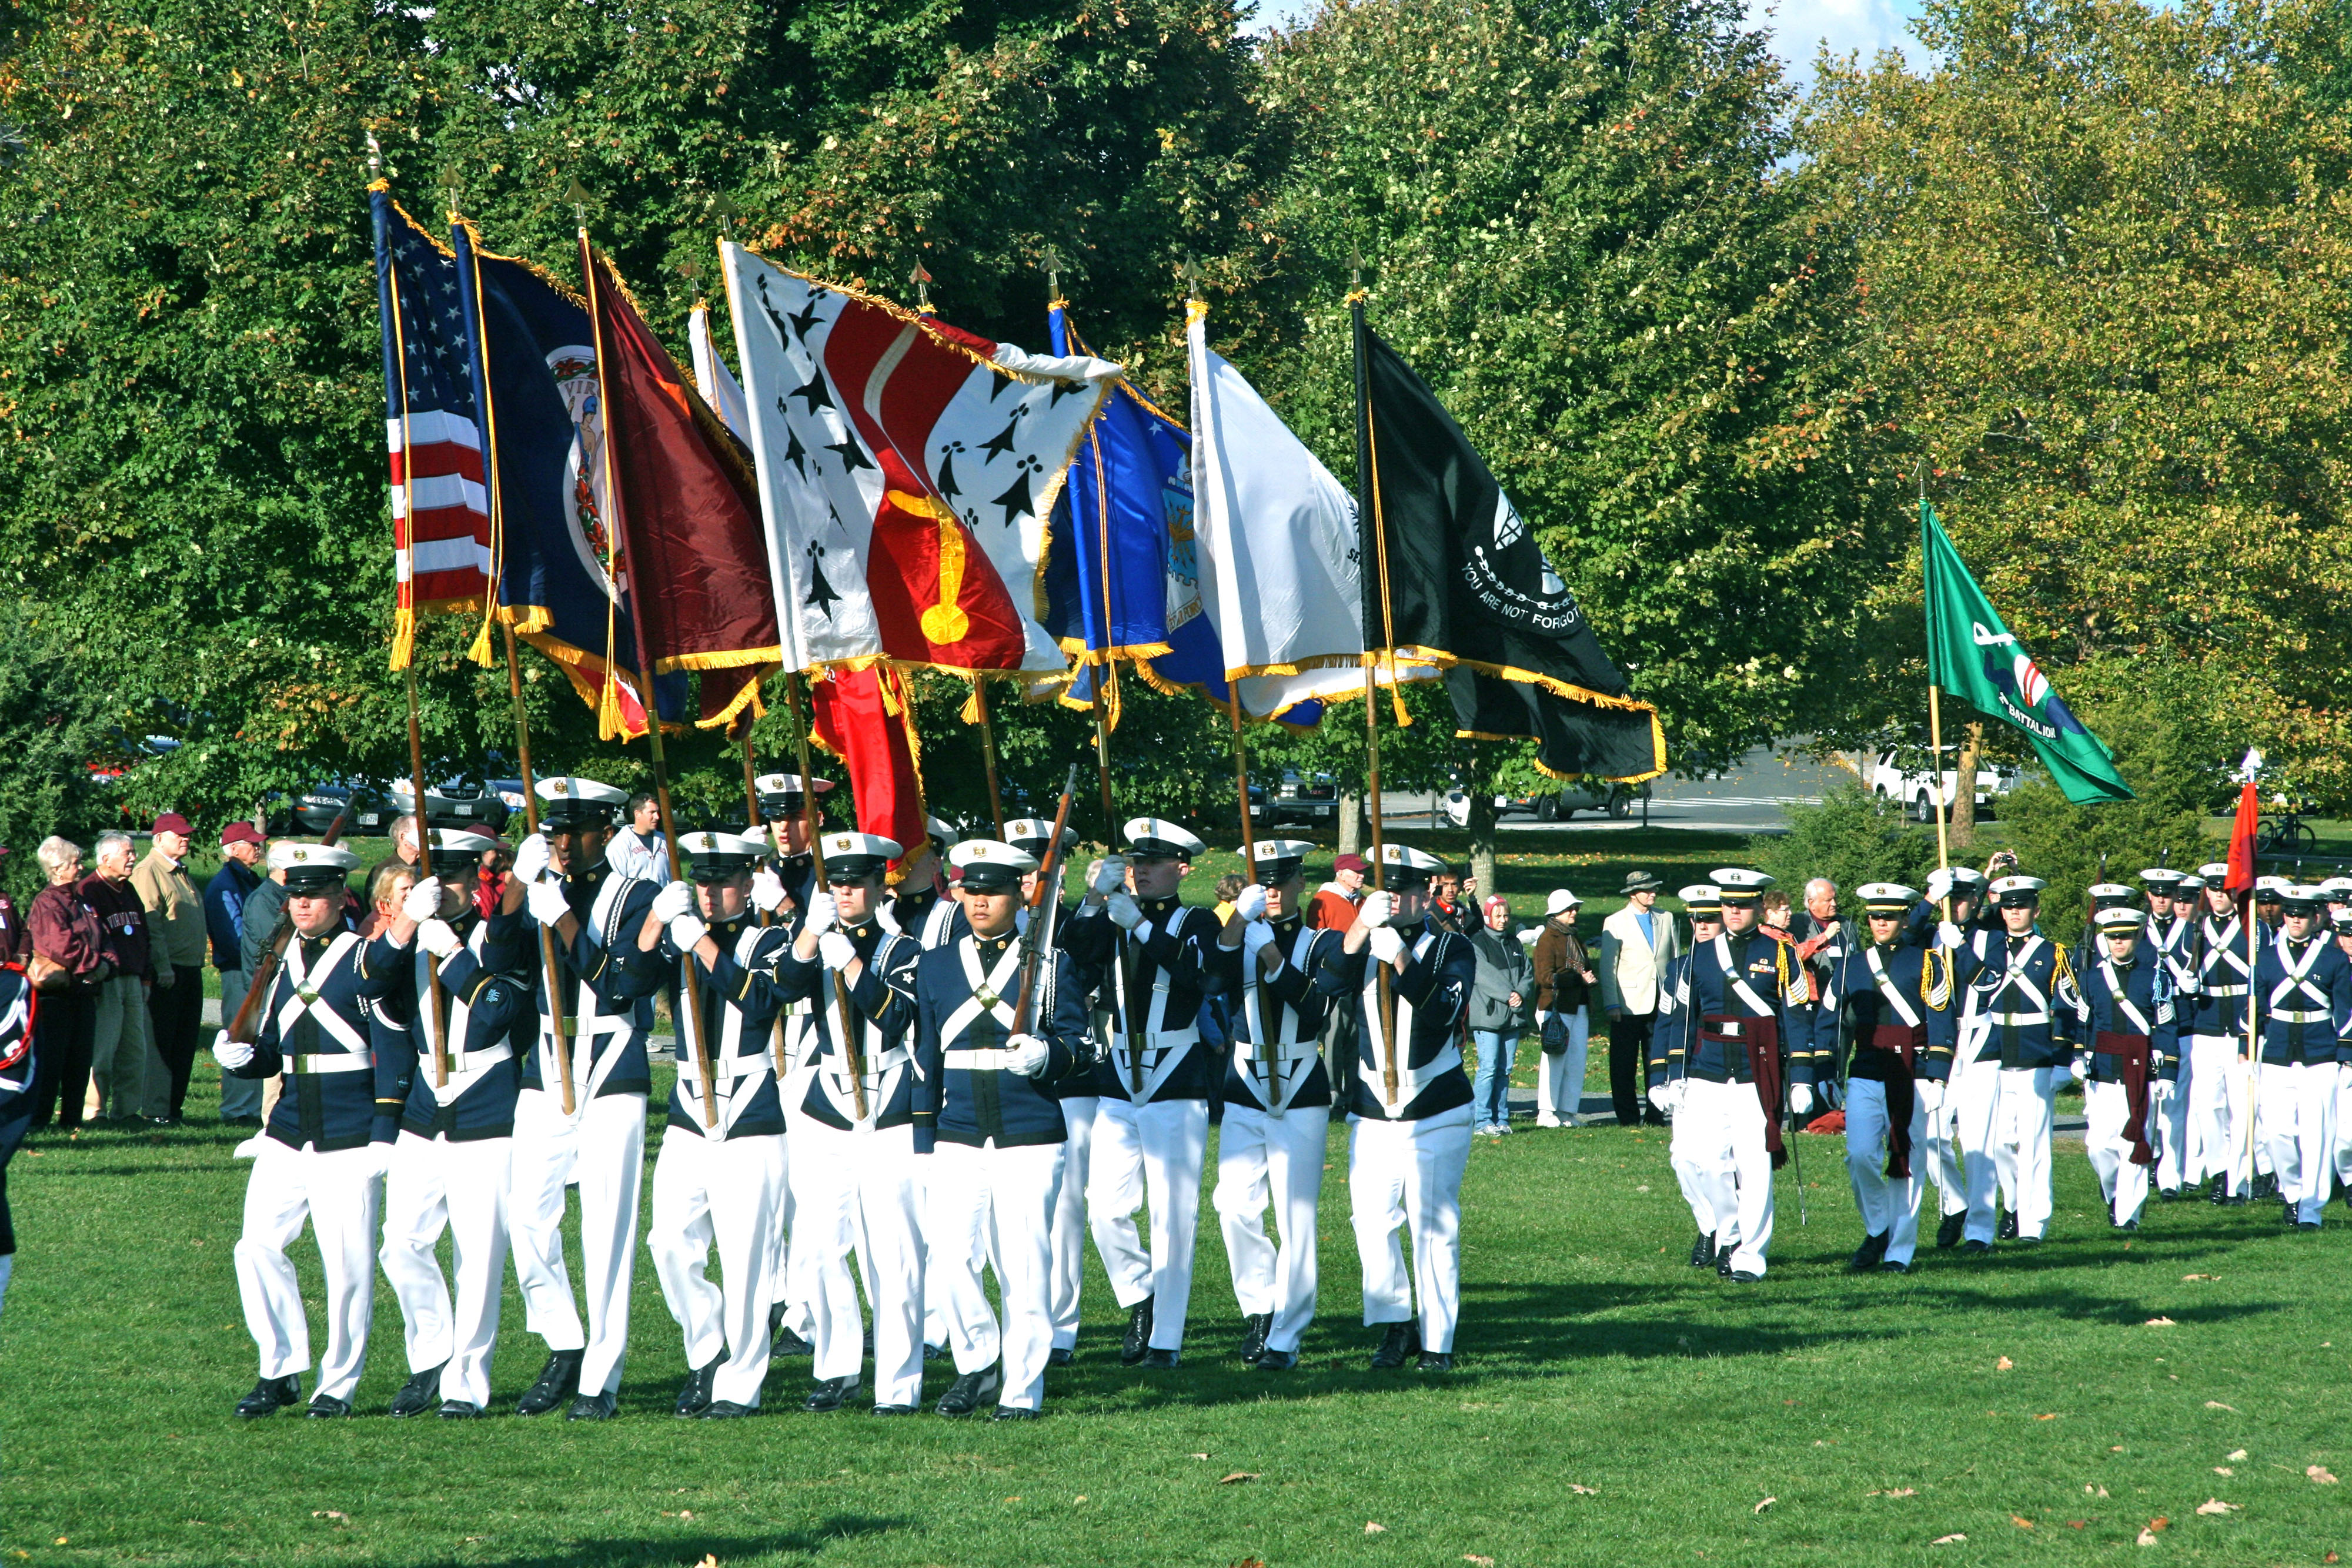 The Virginia Tech Corps of Cadets Color Guard